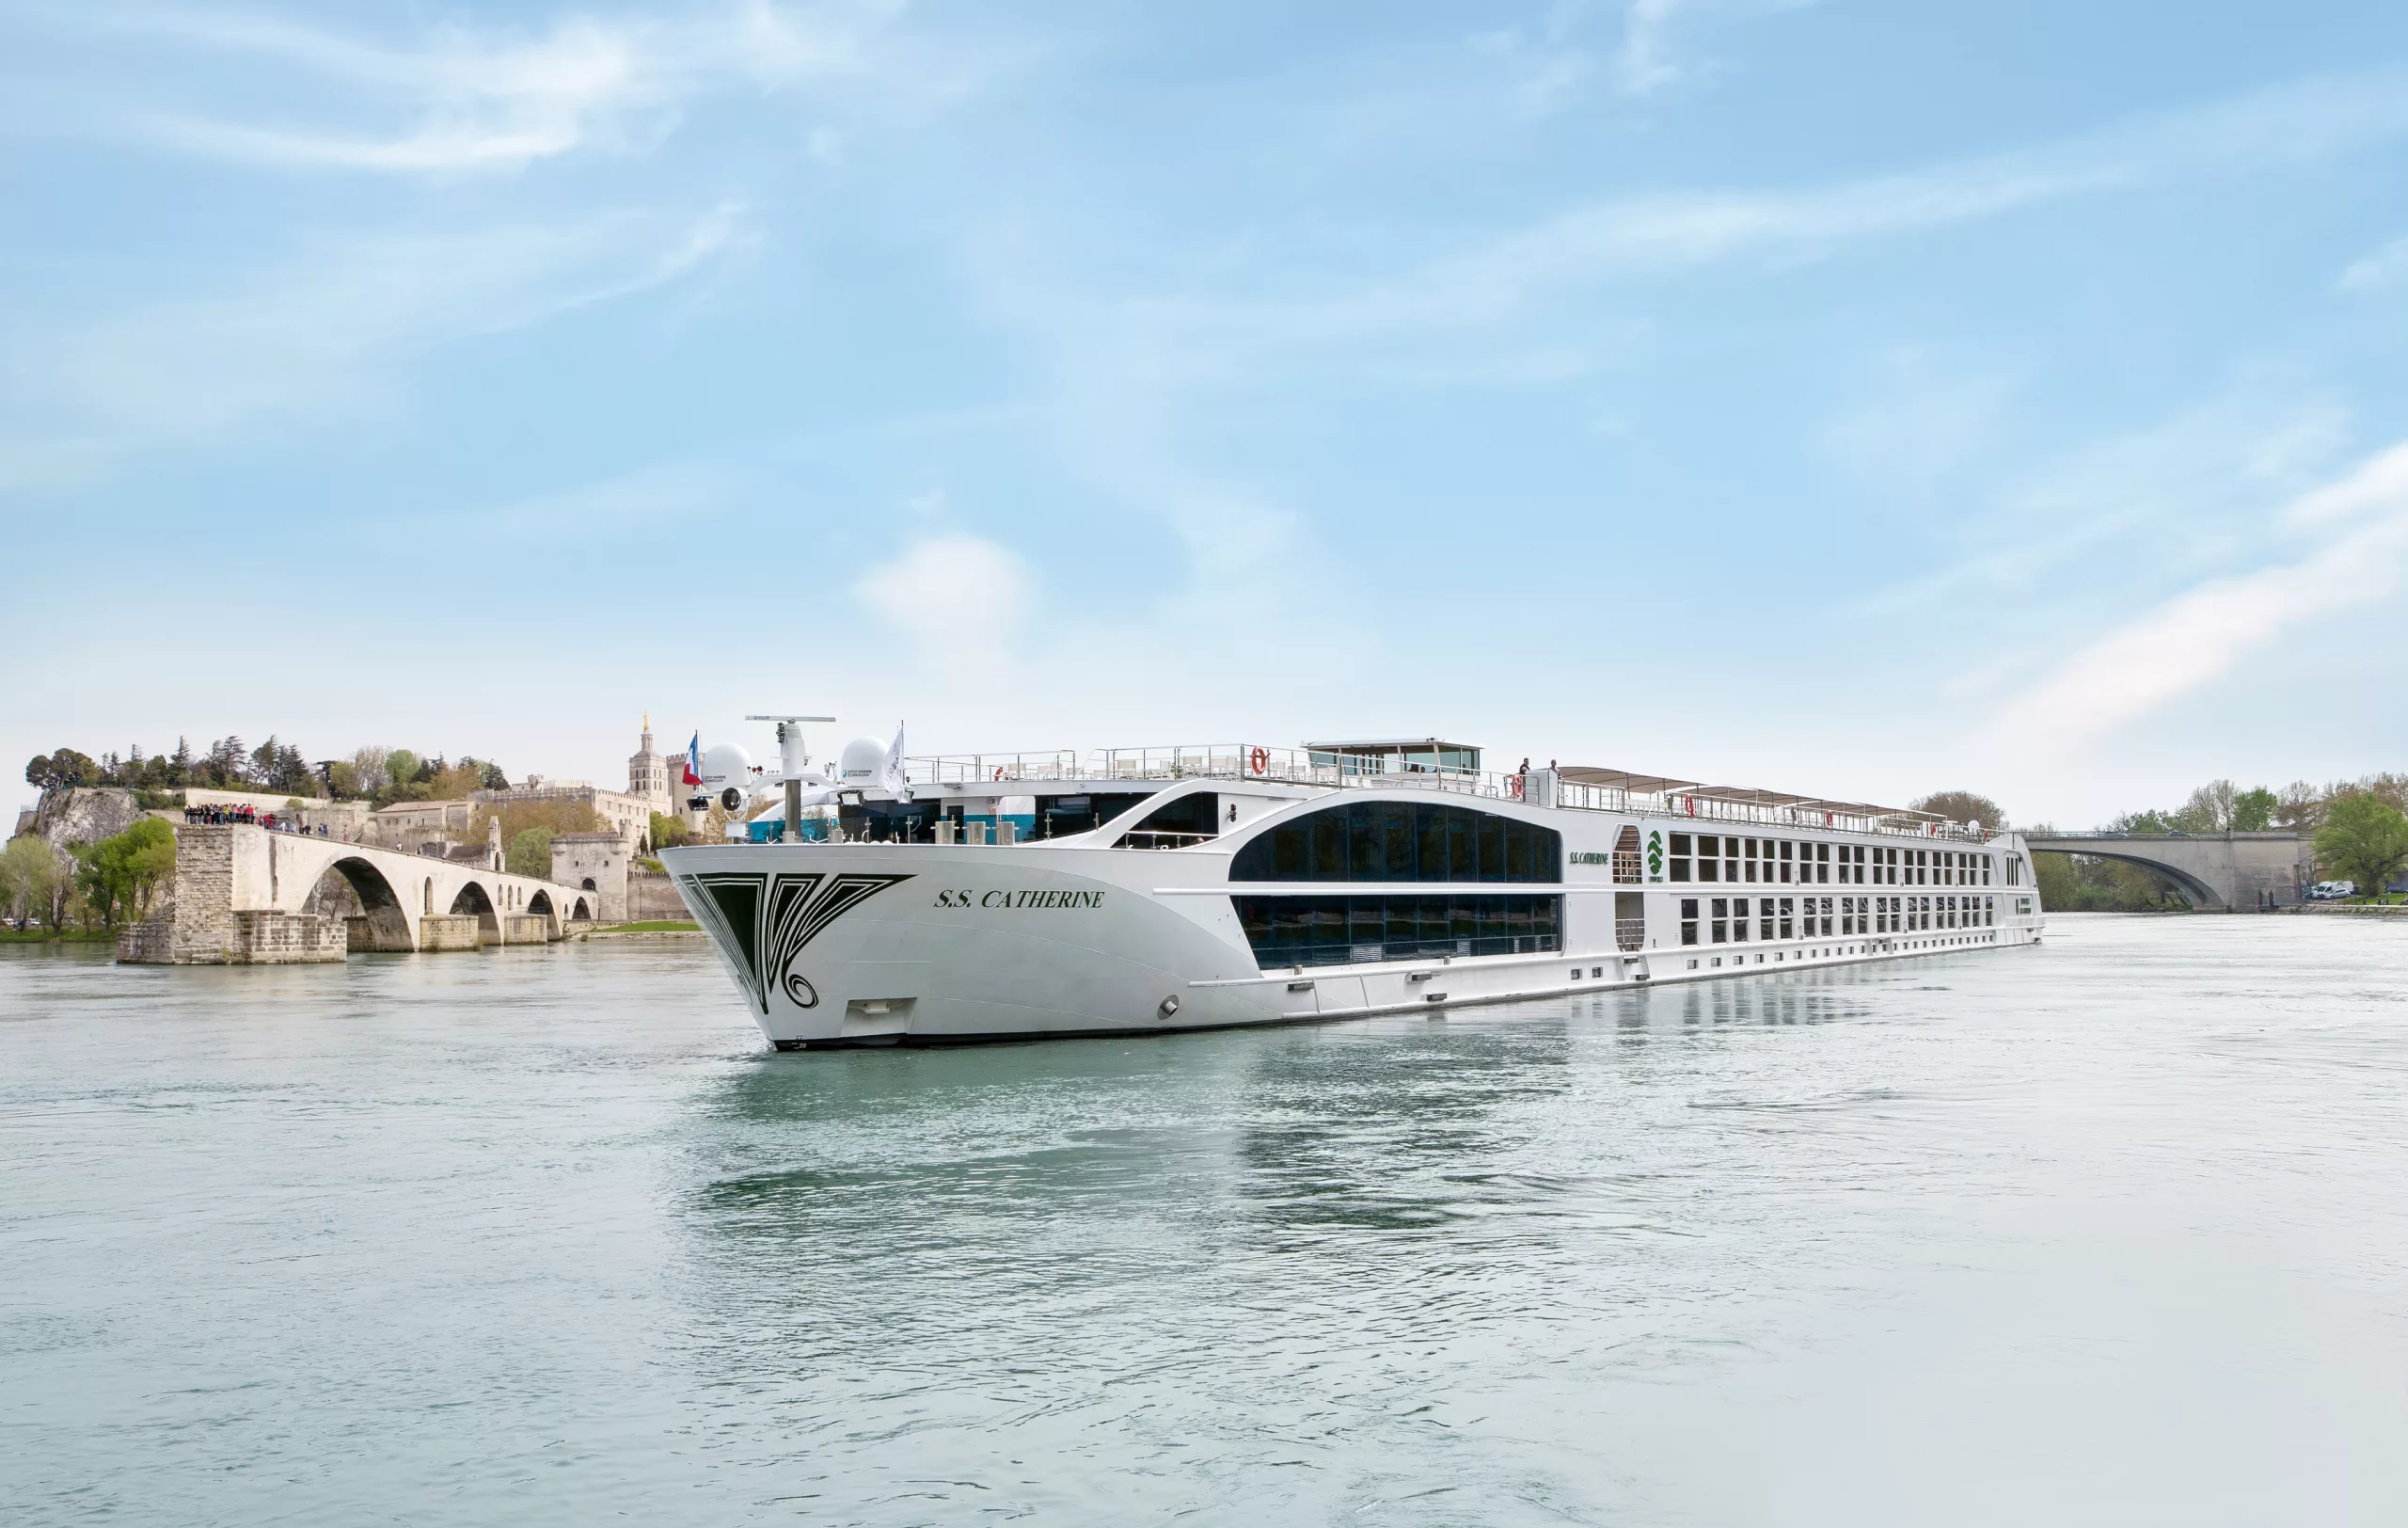 Uniworld Boutique River Cruise Offers Up to 60% Off on Select European Itineraries